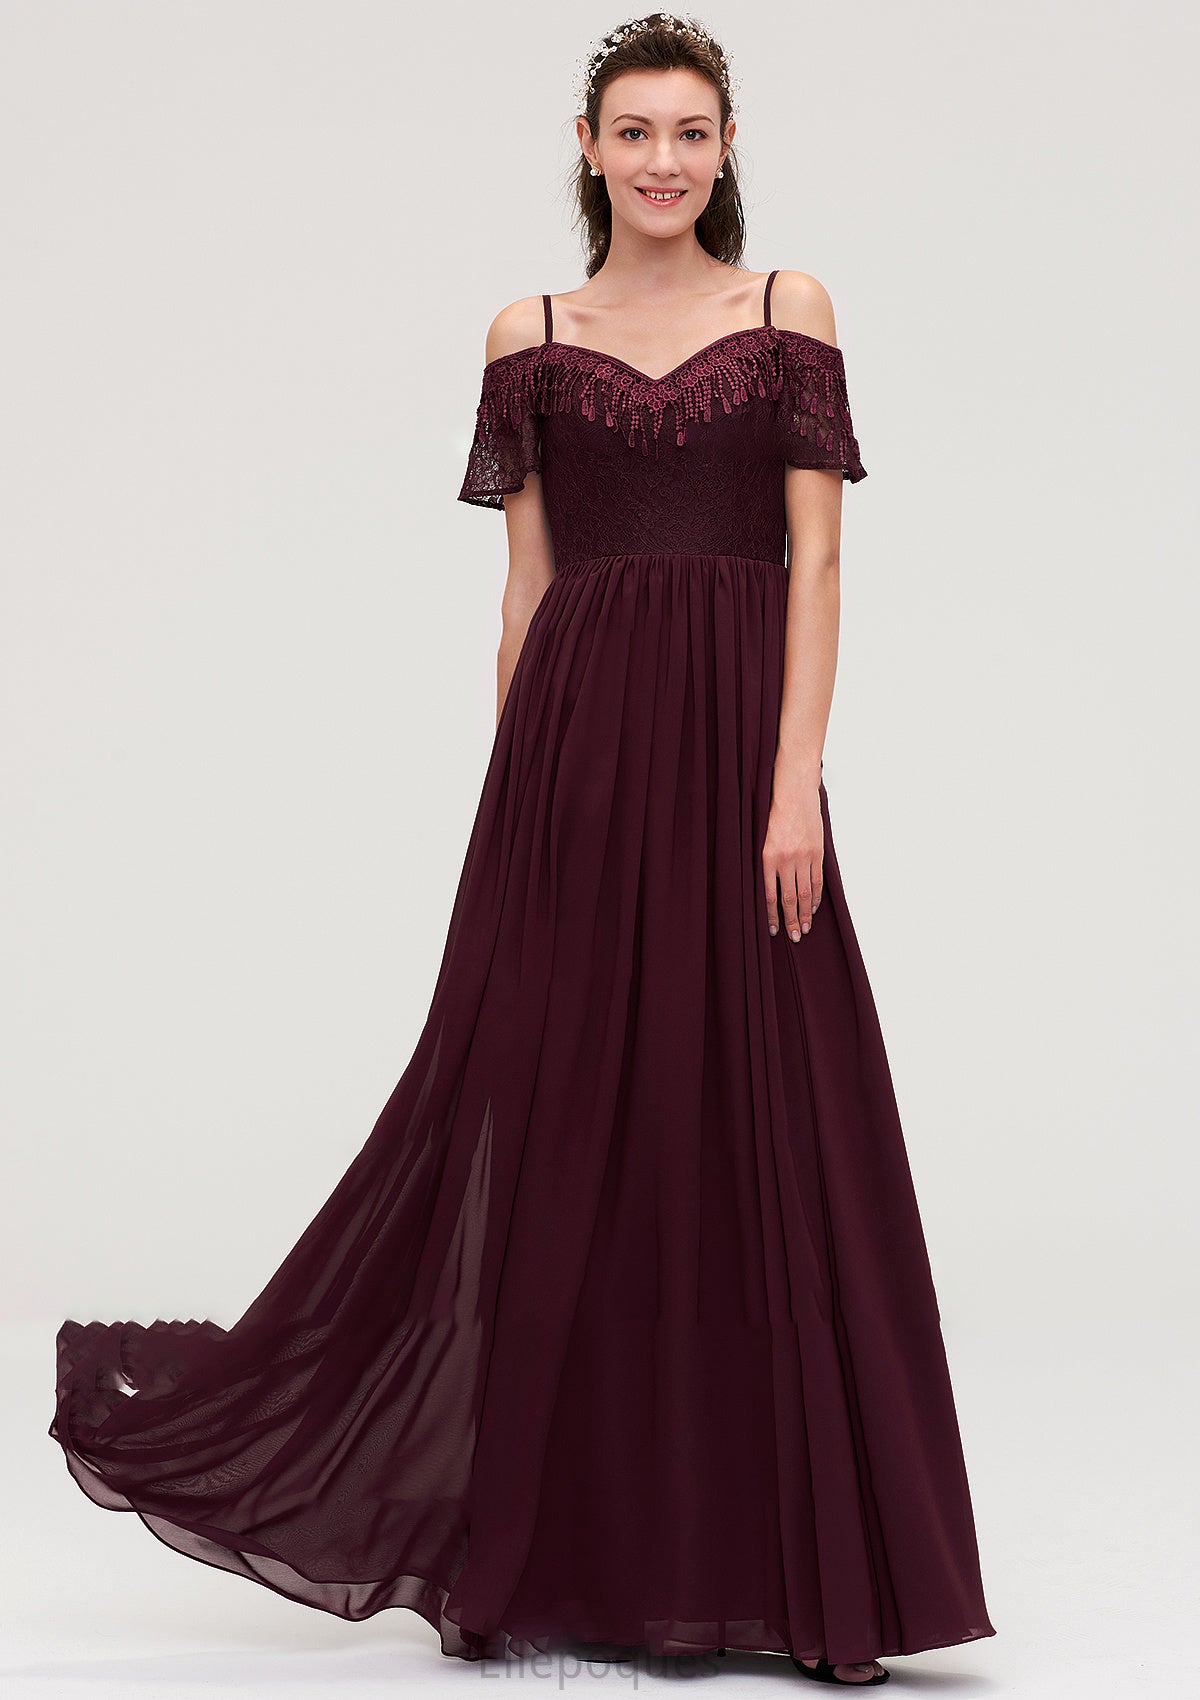 Off-the-Shoulder Sleeveless Chiffon A-line/Princess Long/Floor-Length Bridesmaid Dresseses With Lace Danica HOP0025449